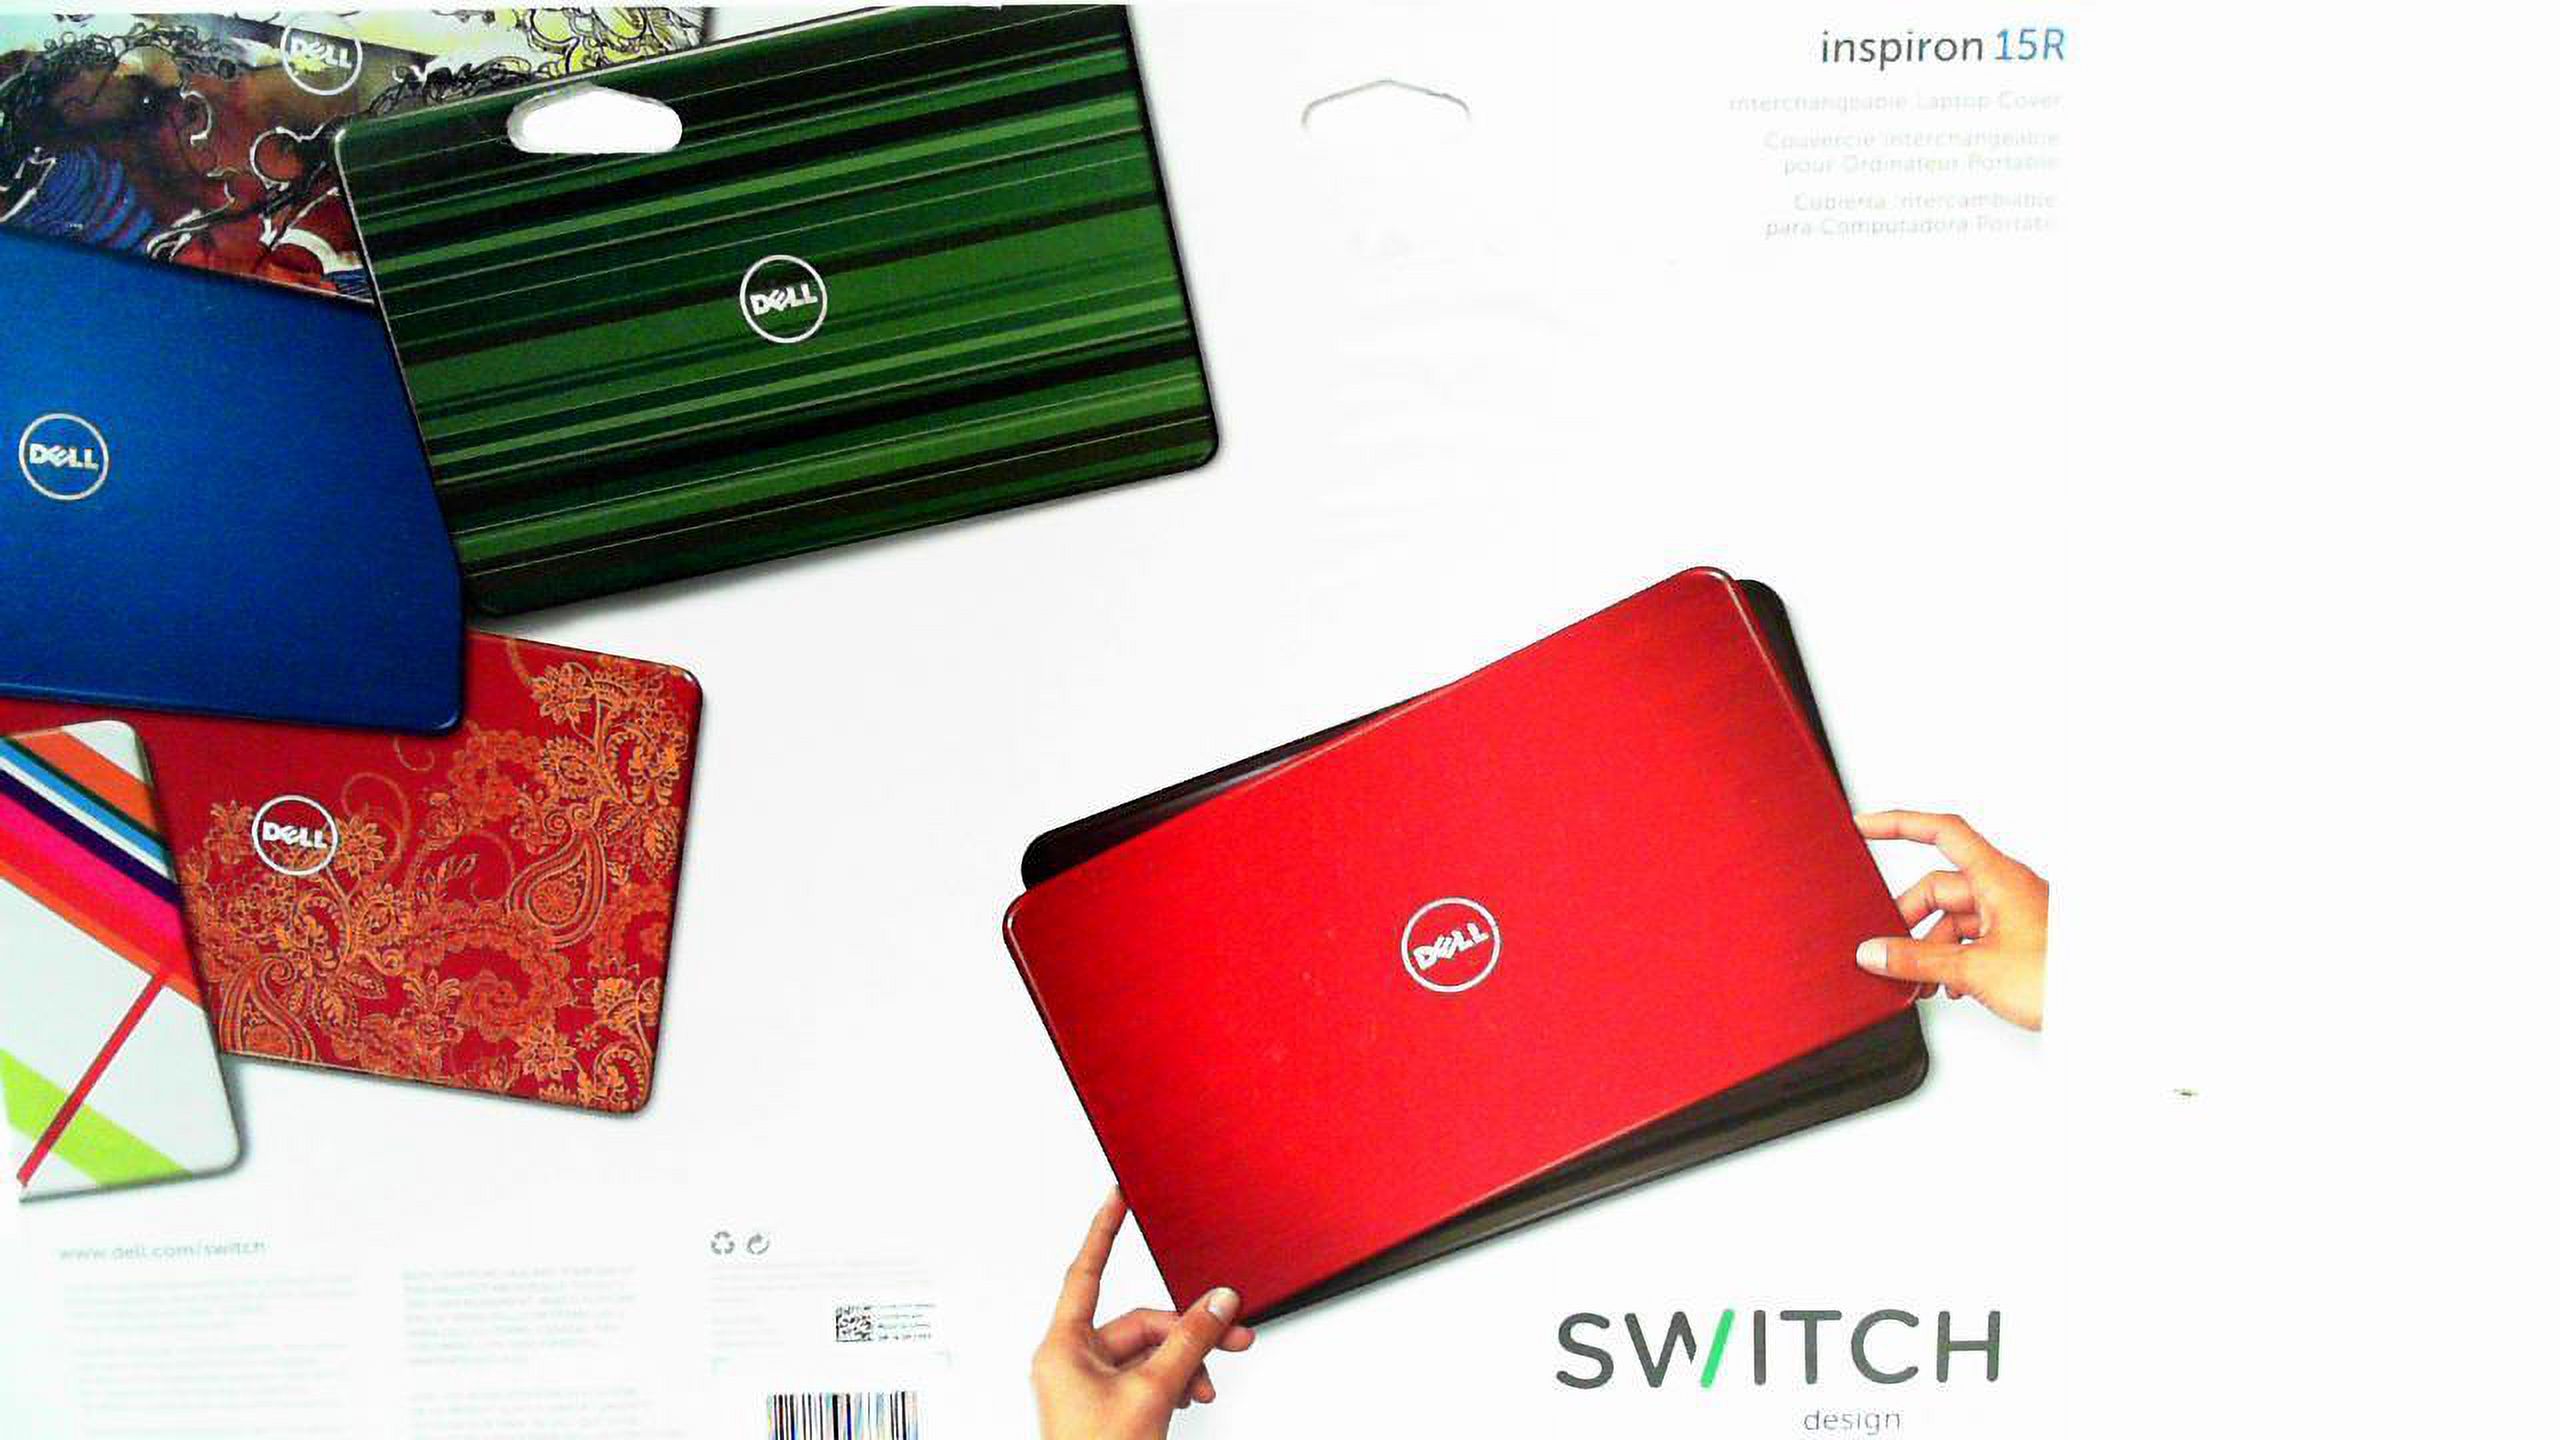 Dell SWITCH by Design Studio Peacock Blue - Notebook replacement lid - peacock blue - for Inspiron 15R, 15R N5110 - image 2 of 3